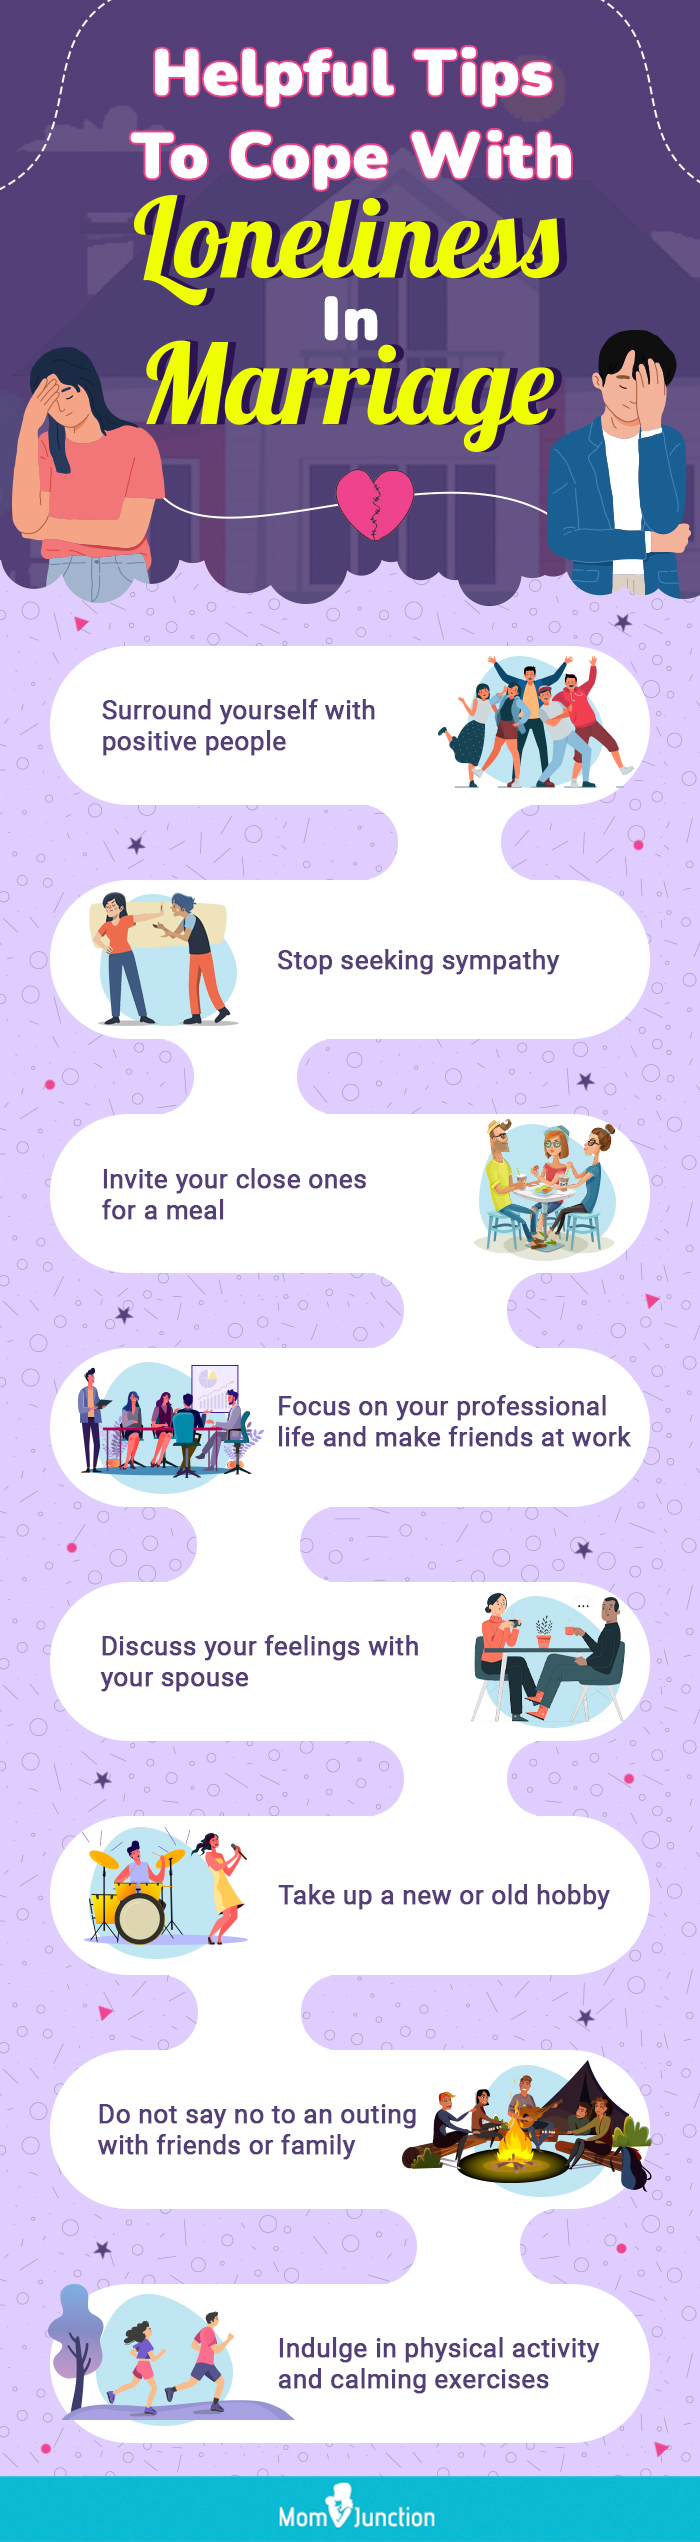 helpful tips to cope with loneliness in marriage (infographic)